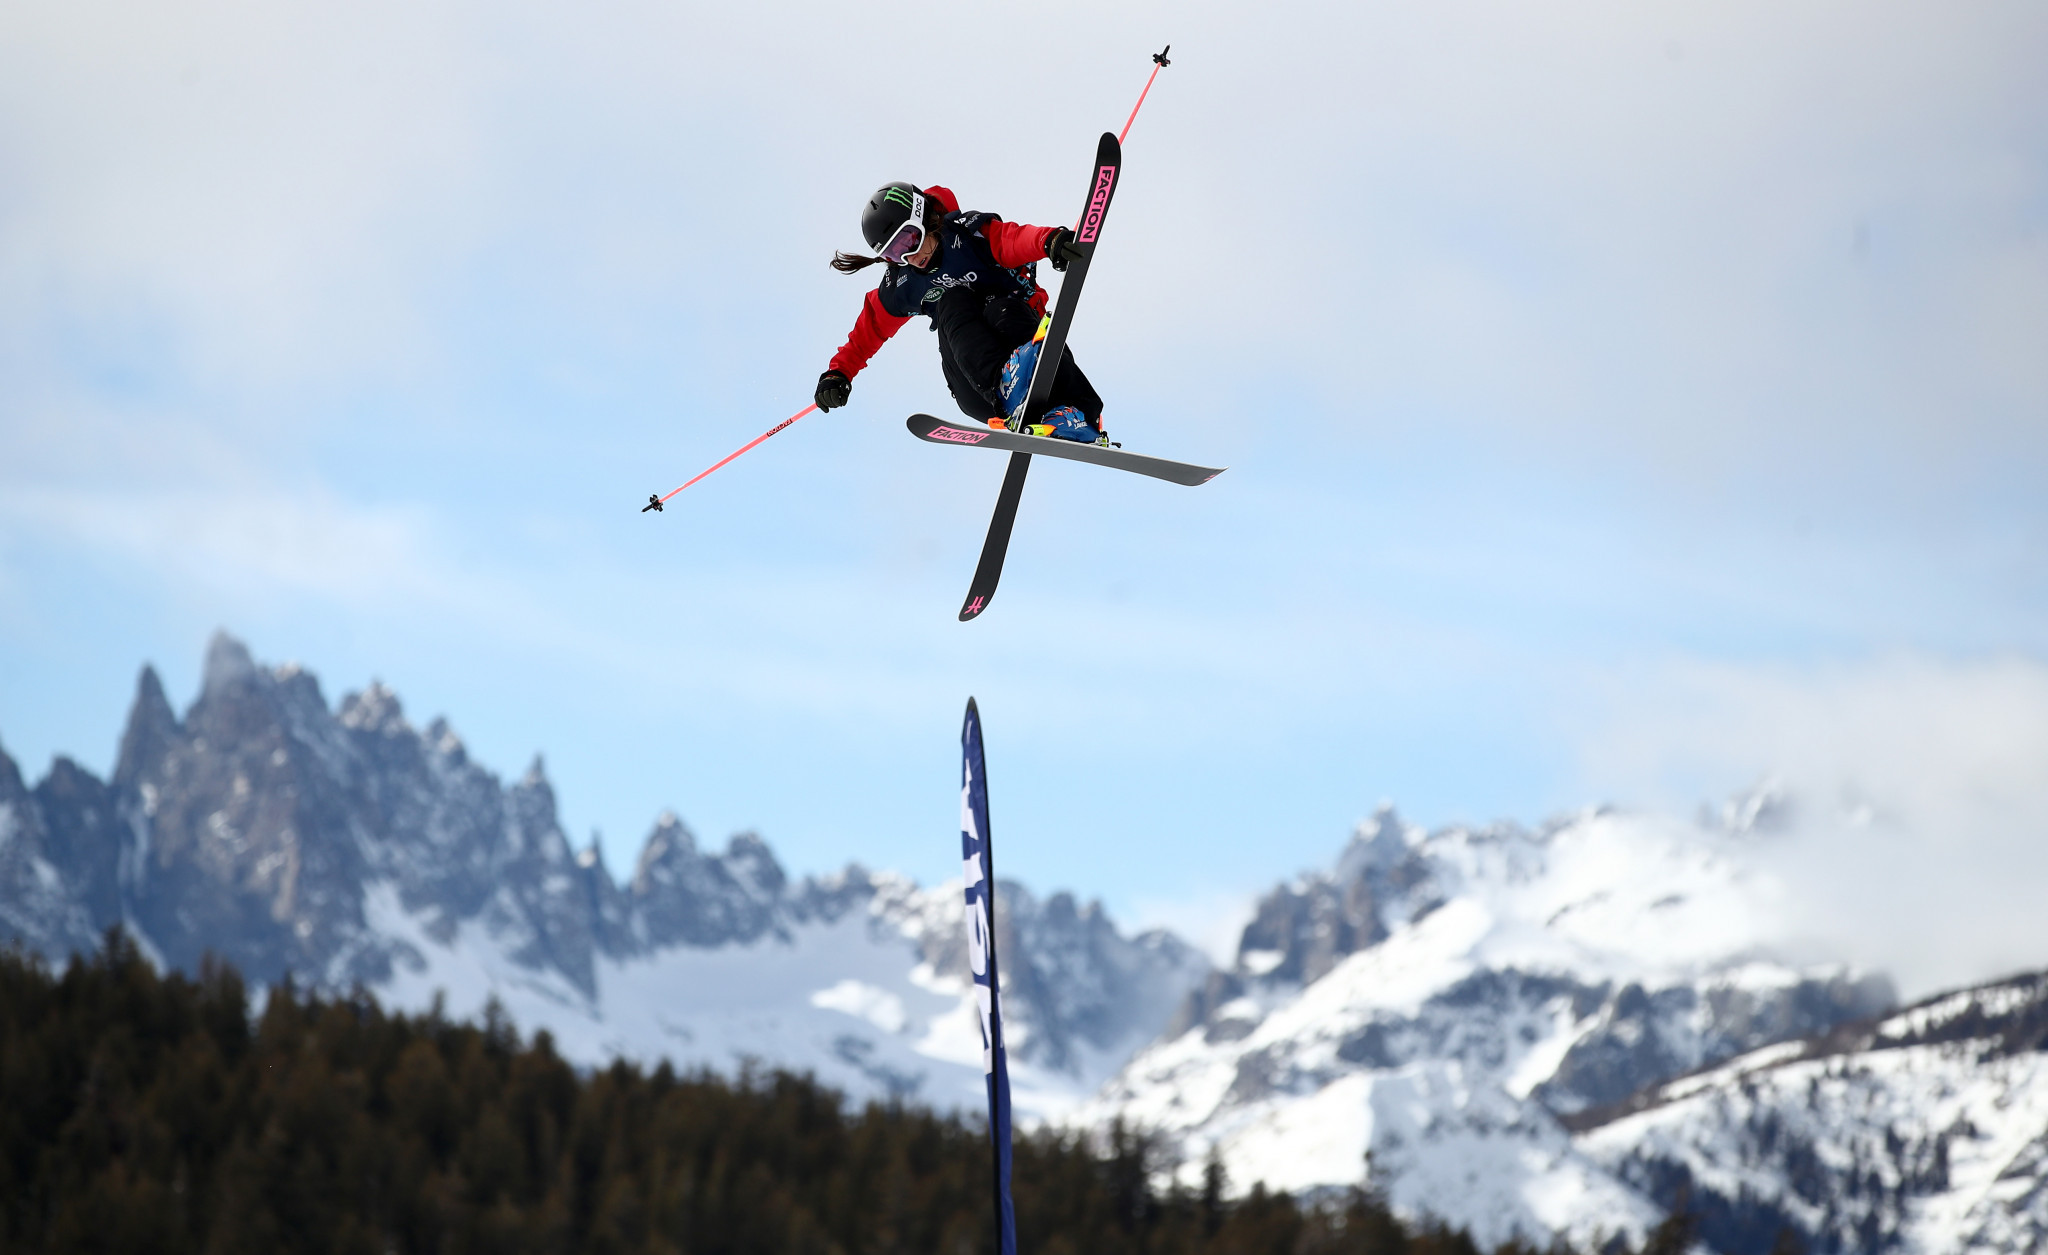 Switzerland's Sarah Höfflin is setting the pace in the FIS Freestyle Ski World Cup standings for women's slopestyle ©Getty Images